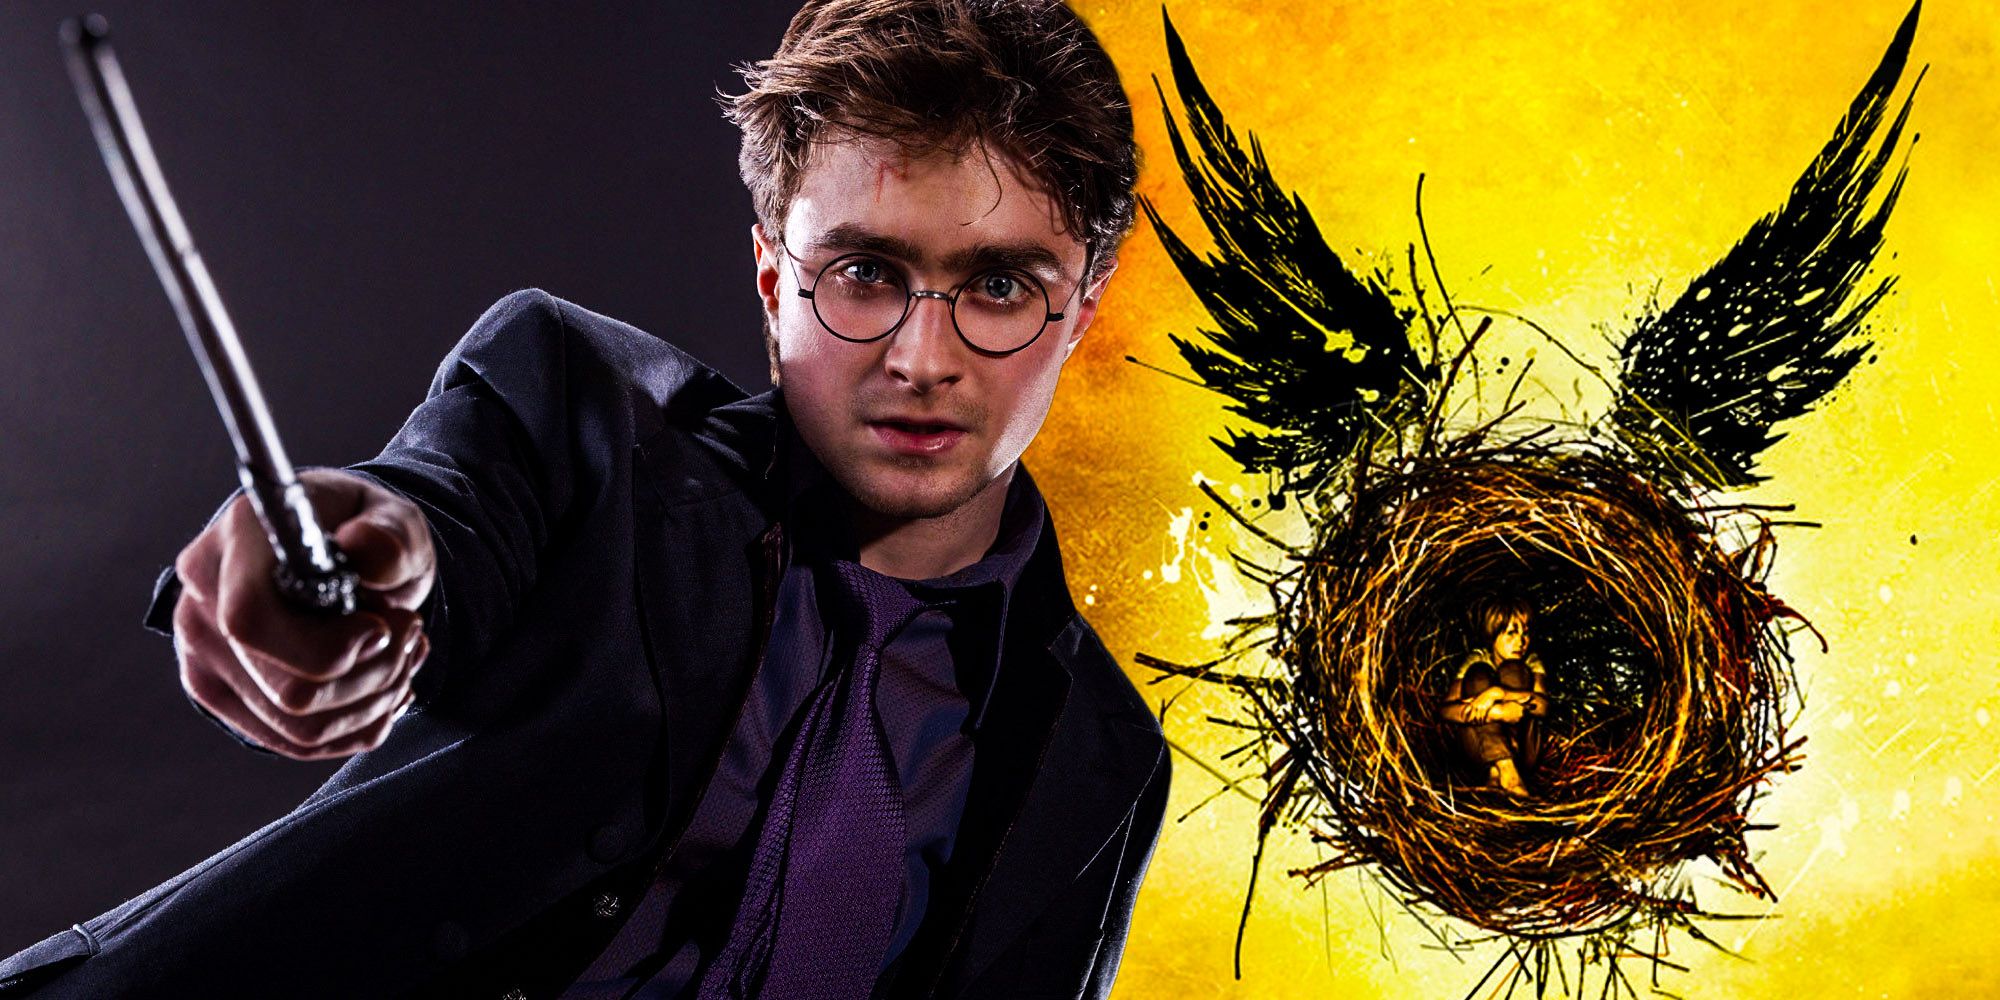 Harry potter and the cursed child movie good or bad